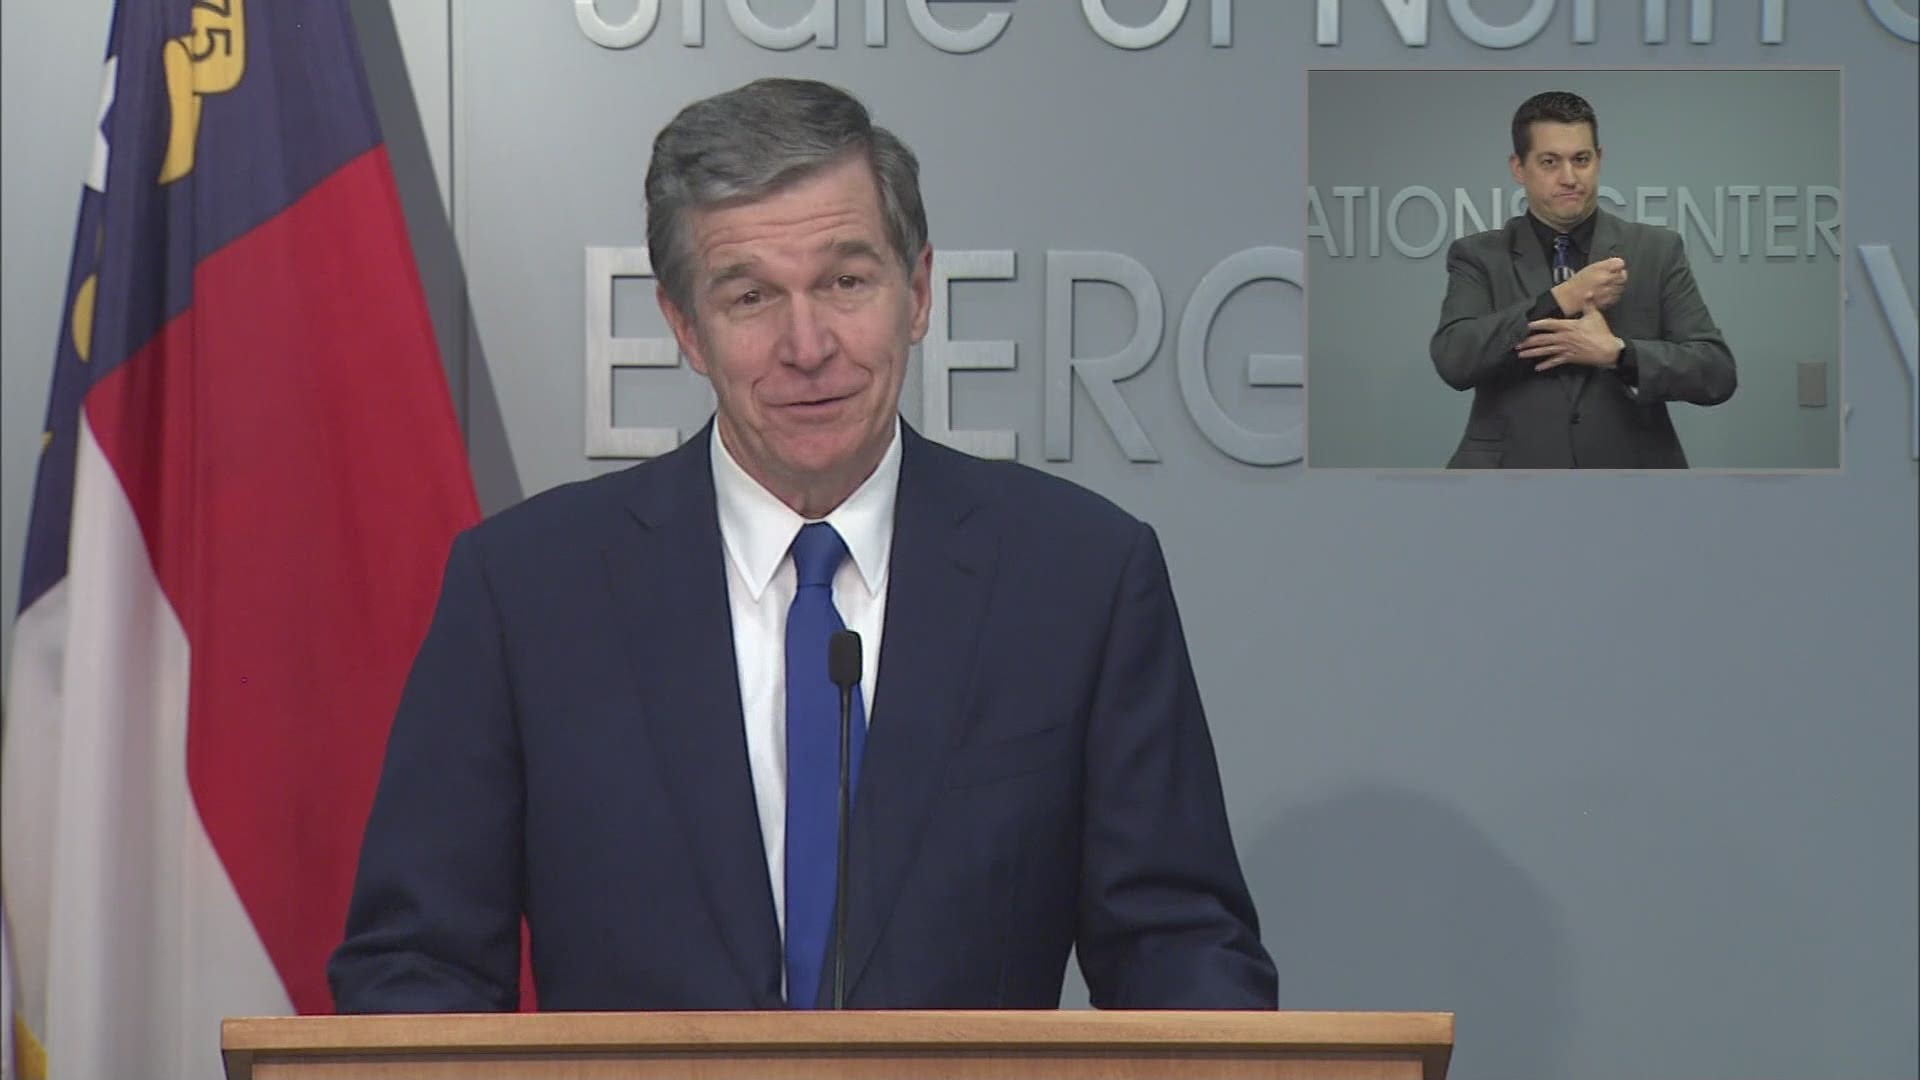 North Carolina Gov. Roy Cooper announced the second wave of checks are going out as part of the COVID-19 recovery relief effort continues.